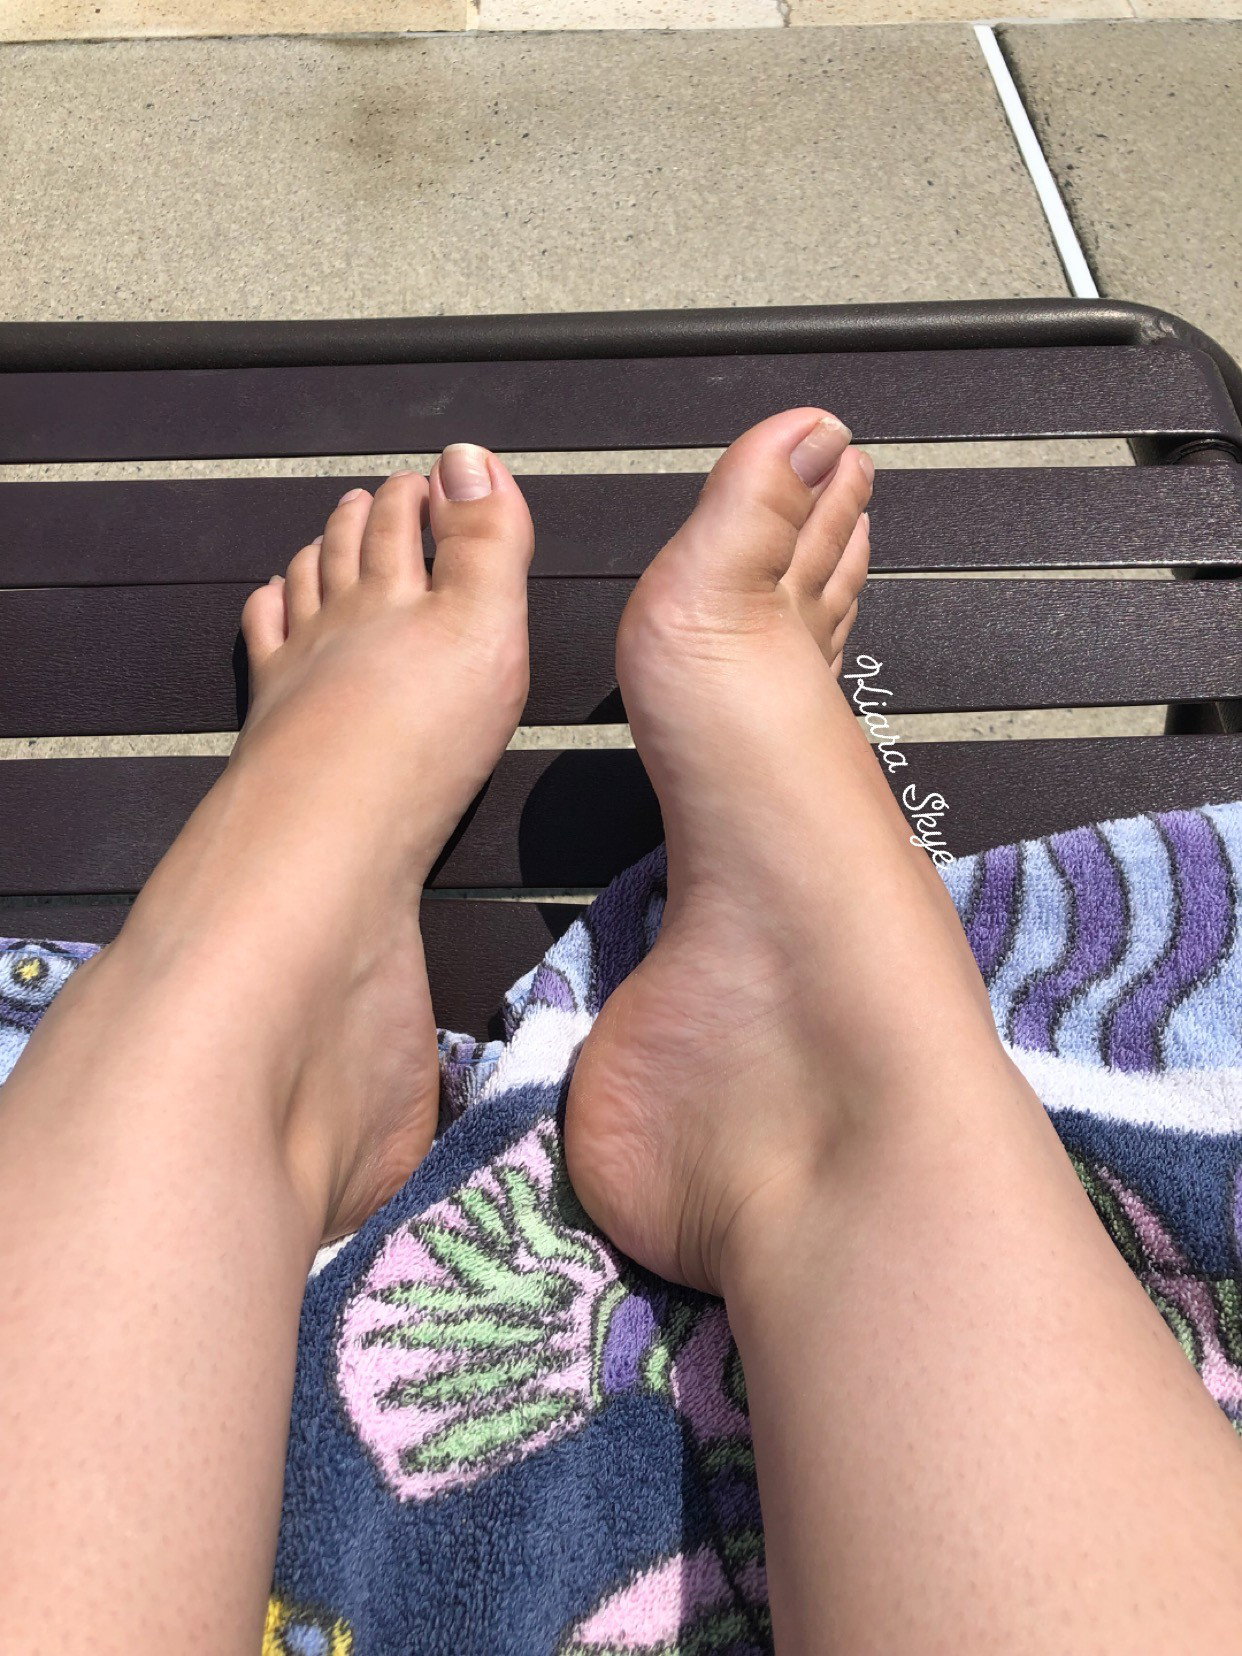 Photo by Kiara Skye with the username @KiaraSkye, who is a star user,  July 25, 2019 at 10:53 PM and the text says '💦 P O O L S I D E 💦

https://onlyfans.com/kittenkiaracb

#footfetish #tits #bikini #summertime #pool #boobs #pawg #thick #brunette #tanning #feet #naturaltoenails #toenails'